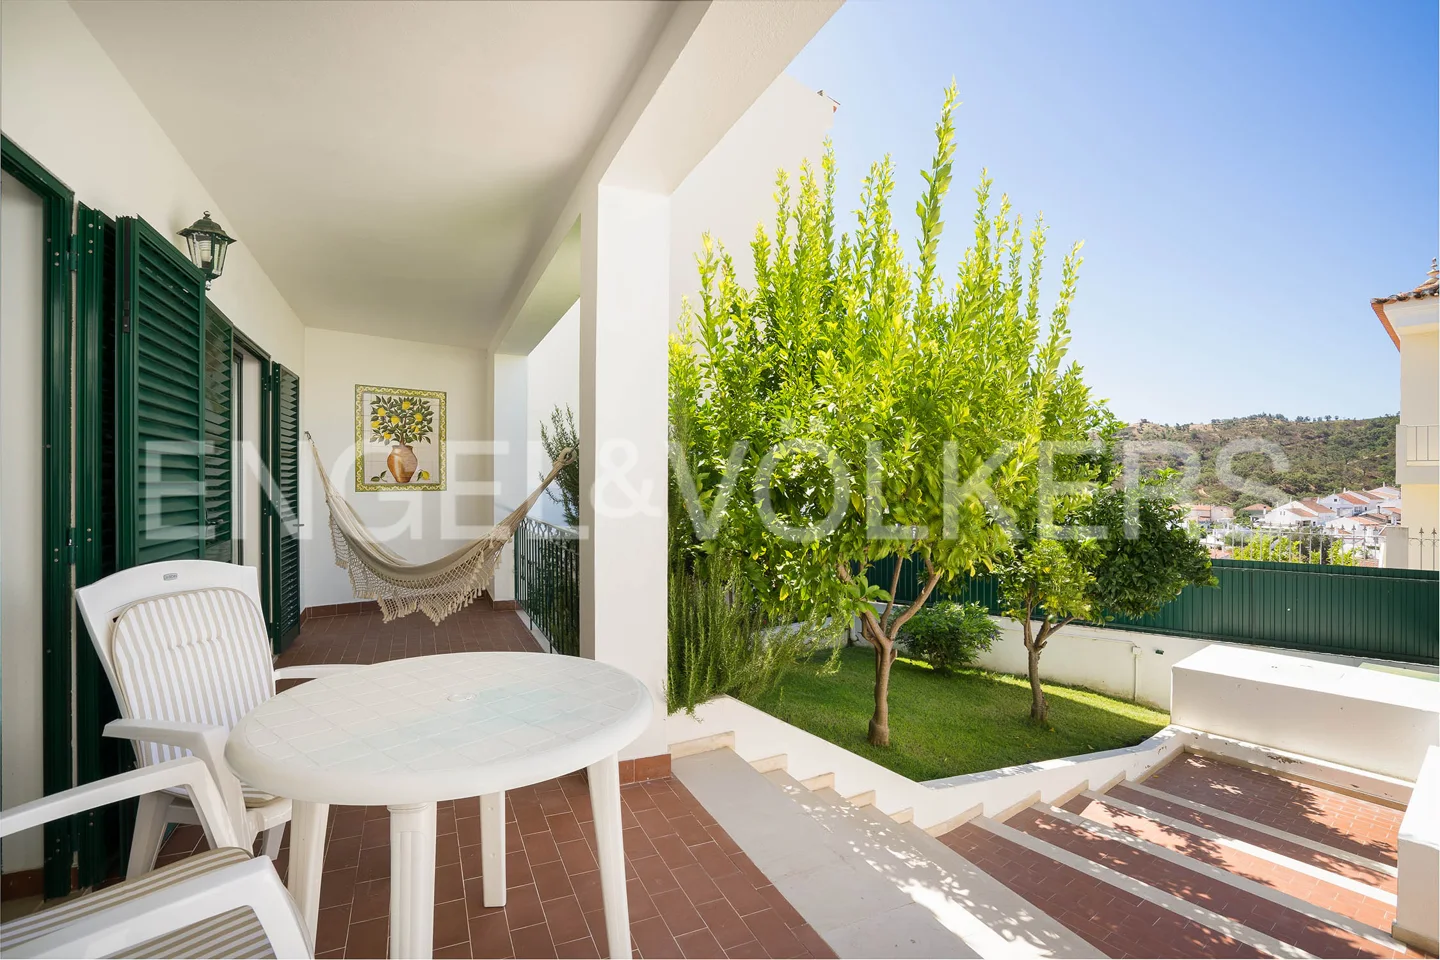 A haven of peace in the heart of the Algarve